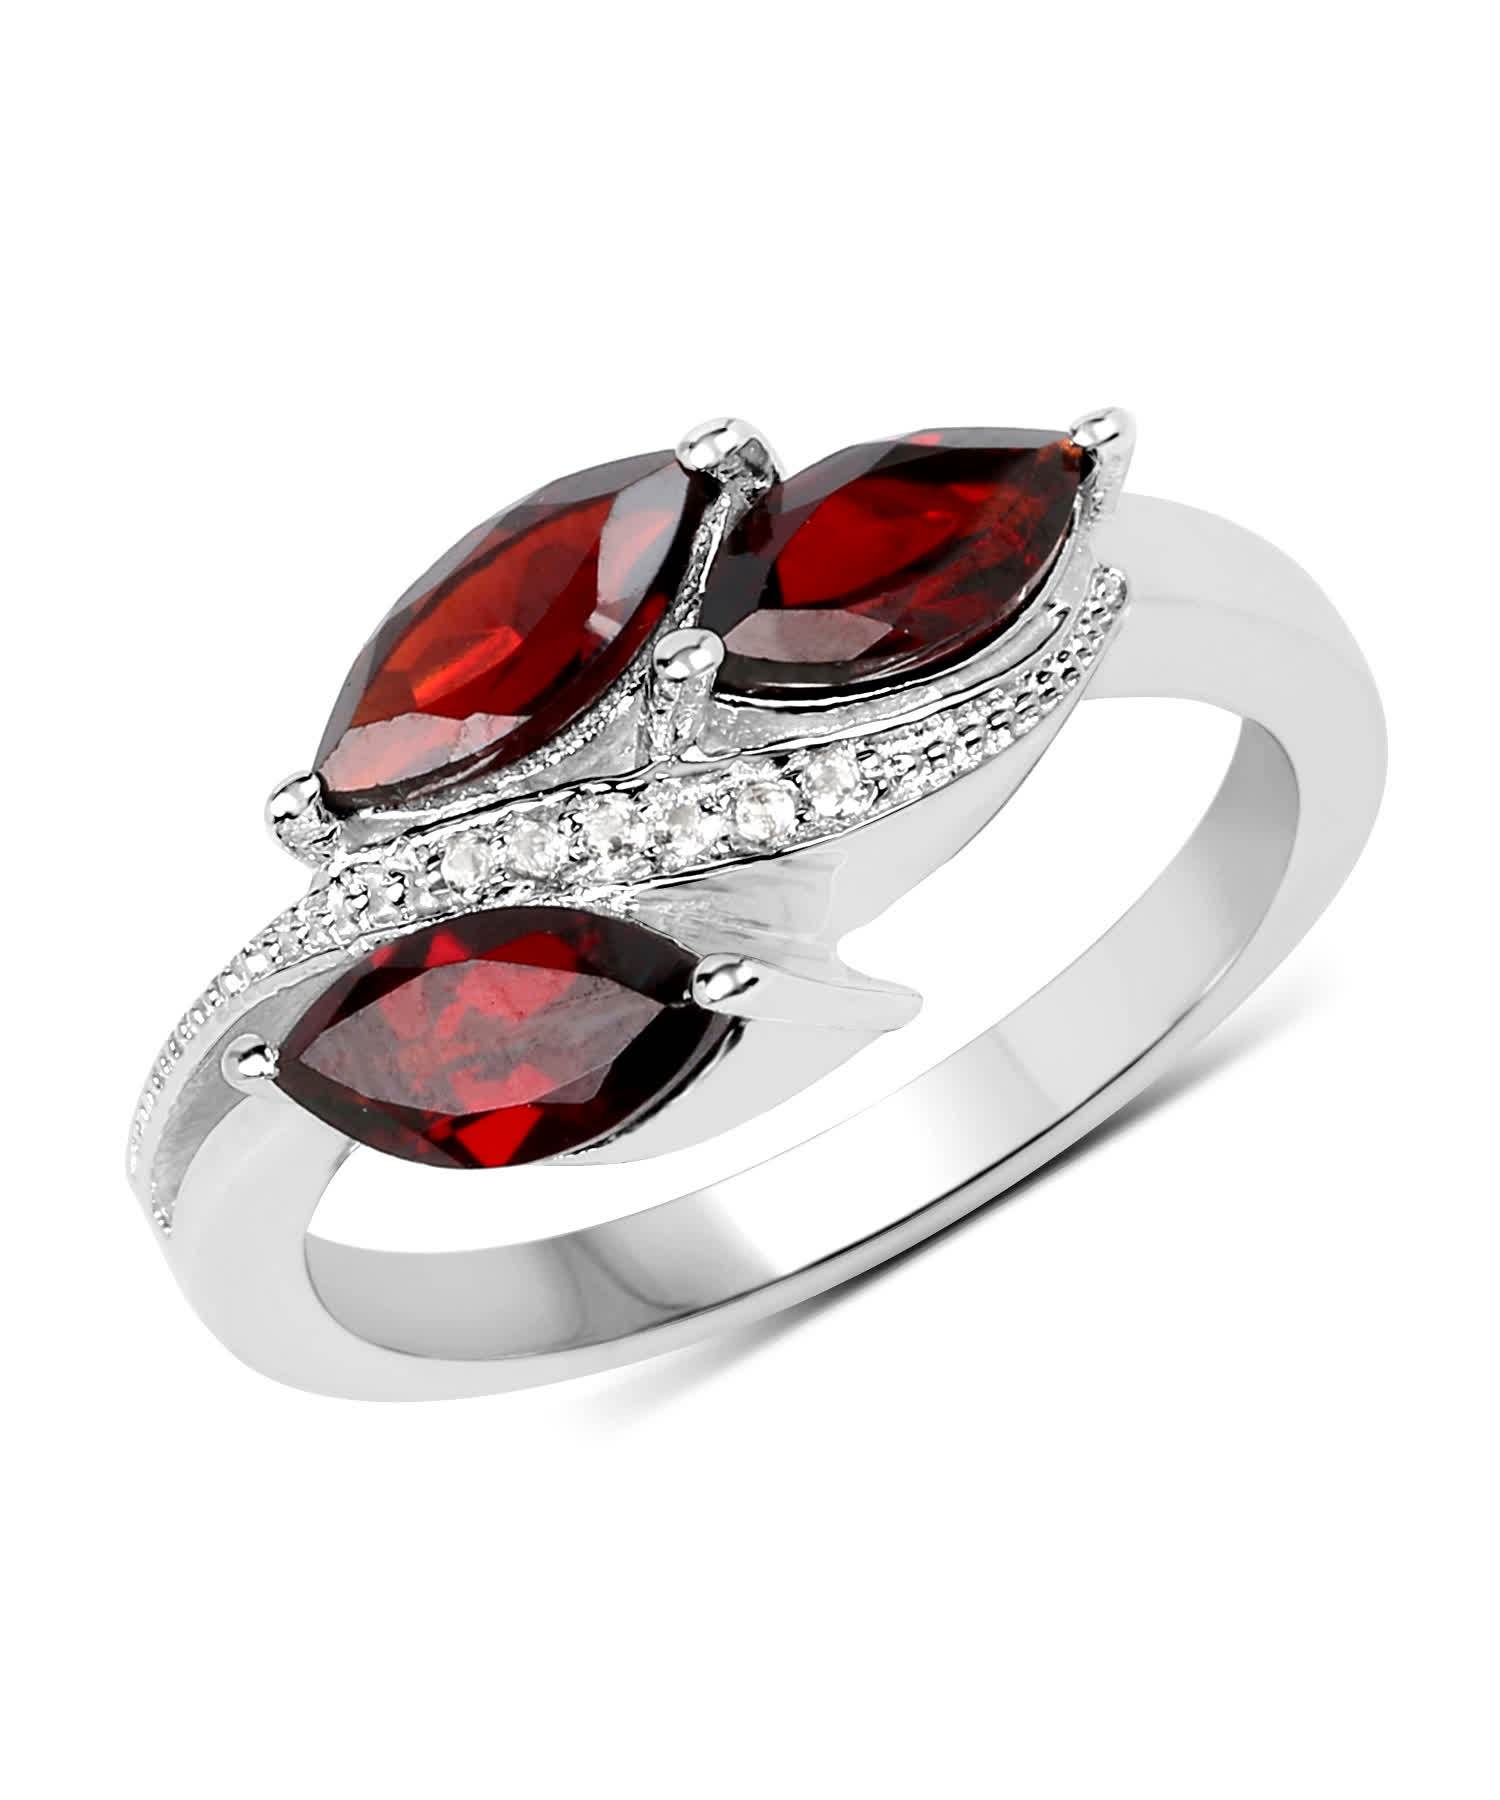 1.98ctw Natural Garnet and Topaz Rhodium Plated 925 Sterling Silver Leaf Ring View 1